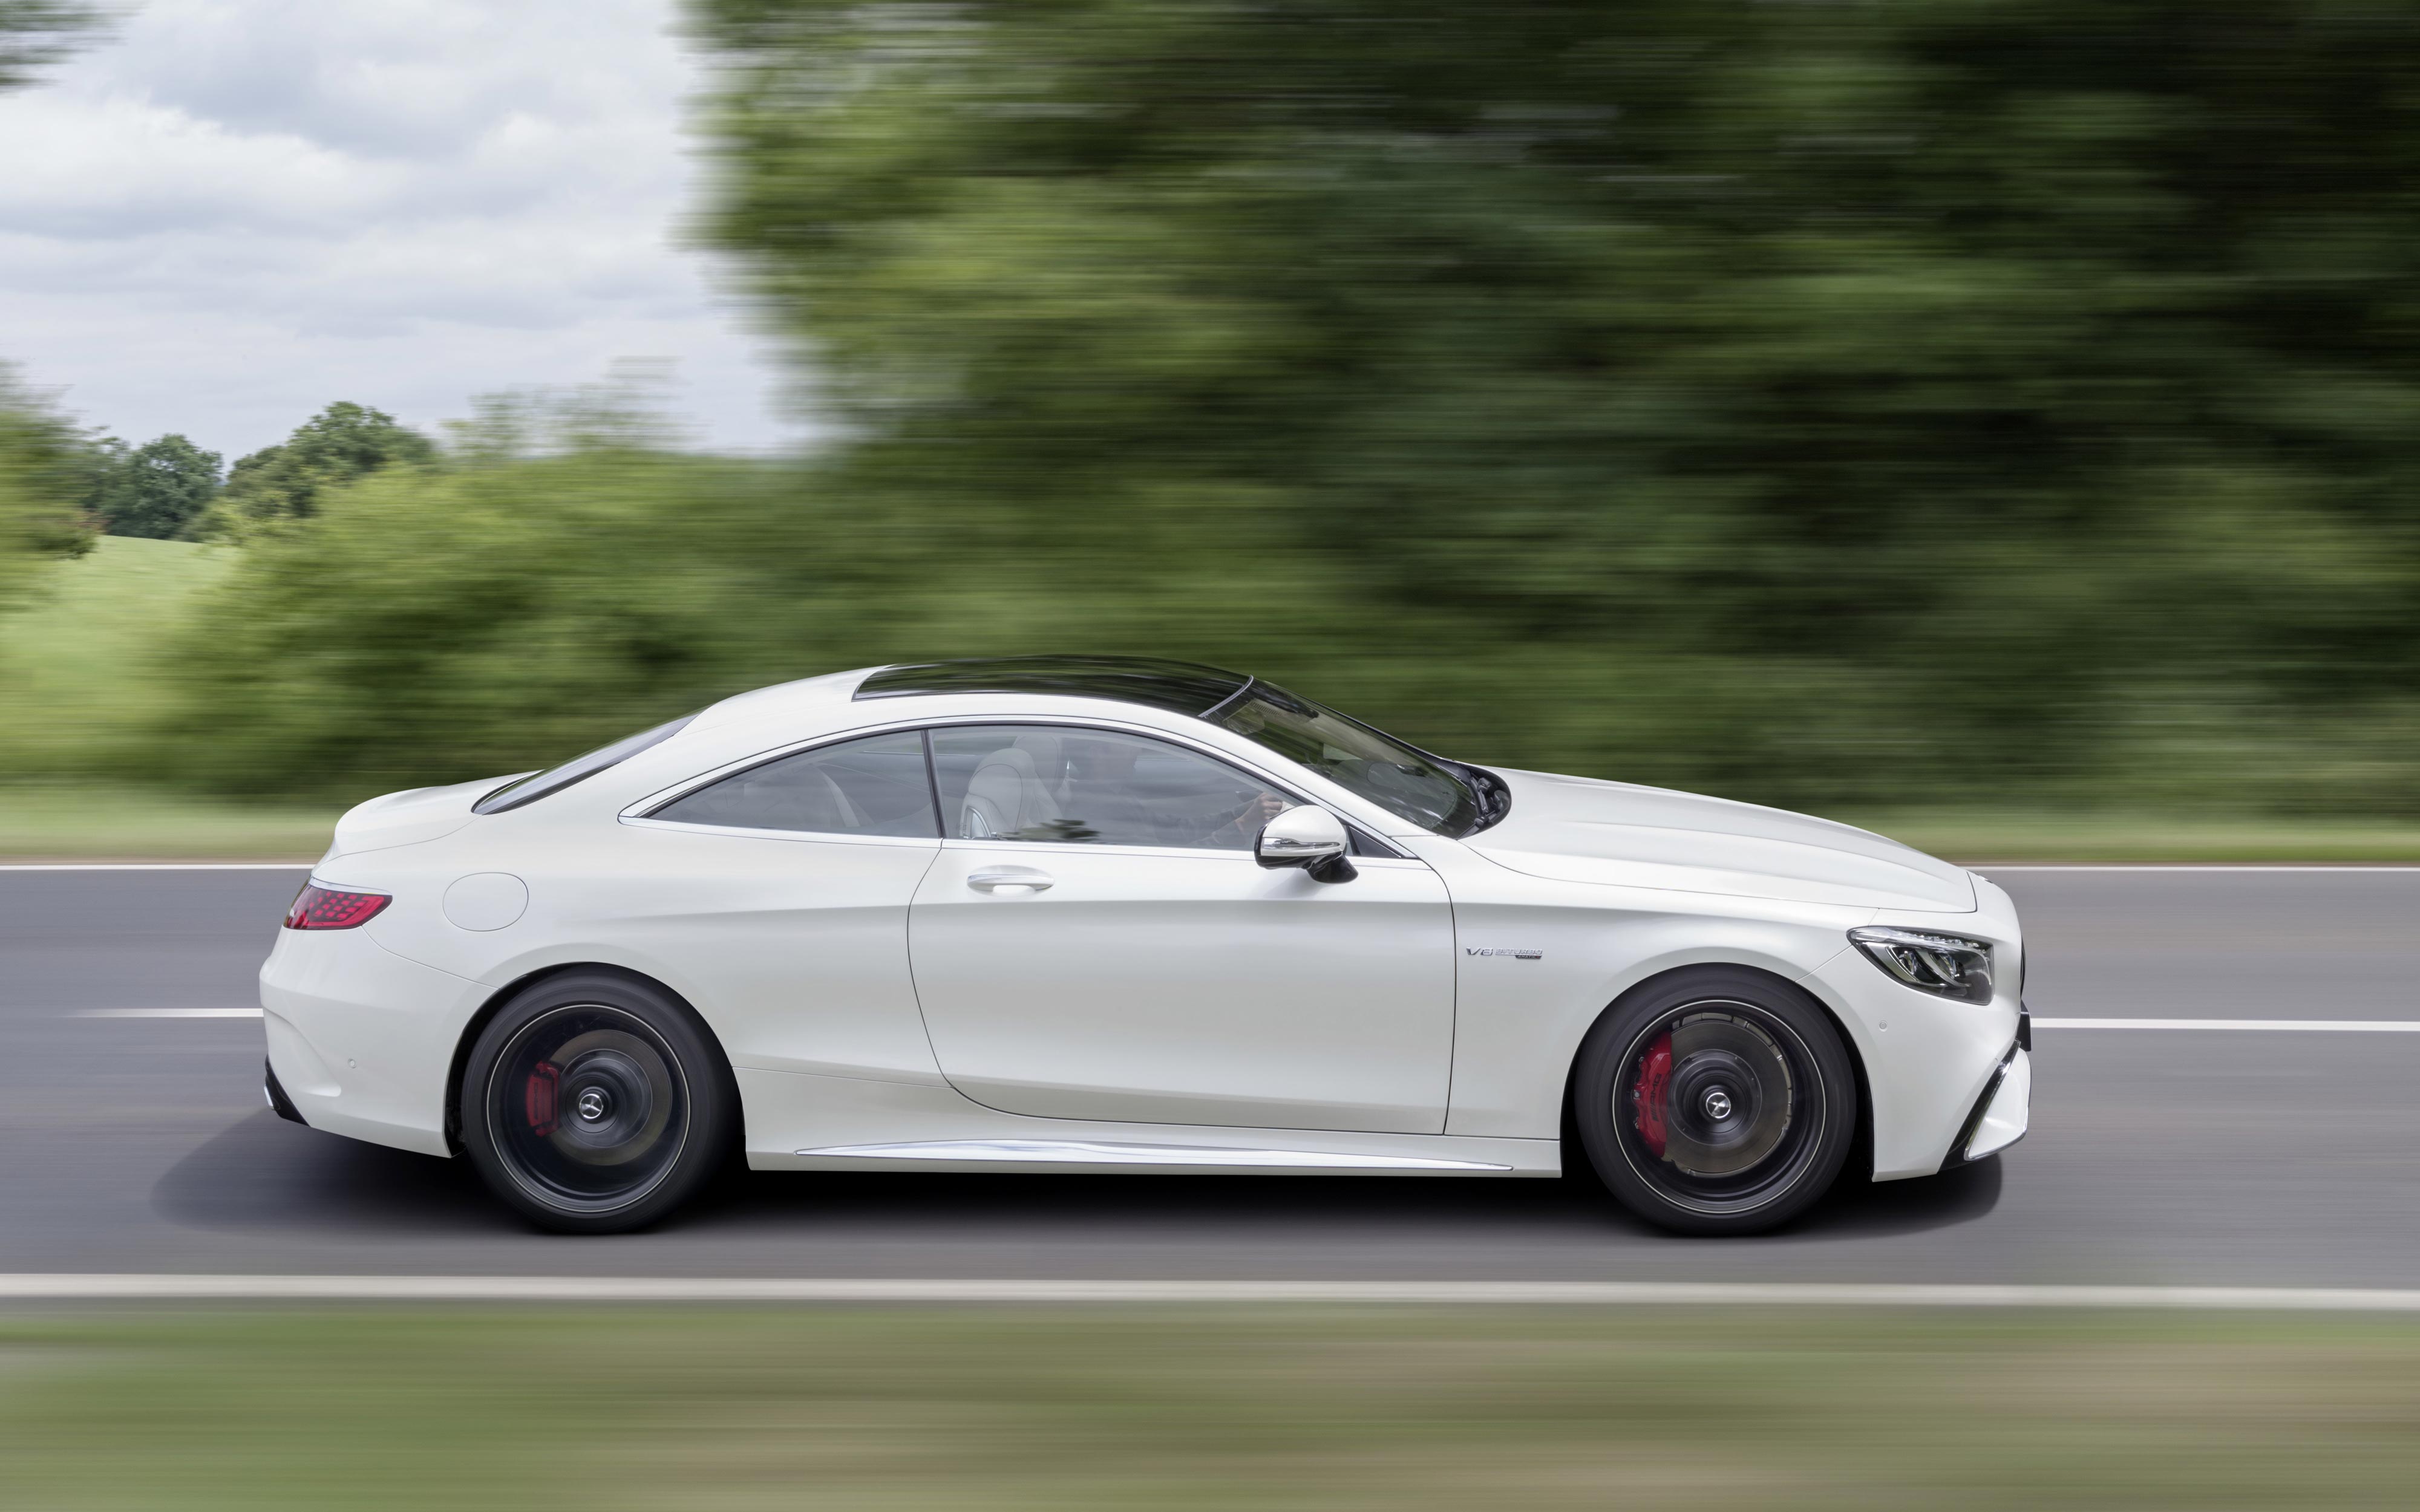  Mercedes S63 AMG Coupe 